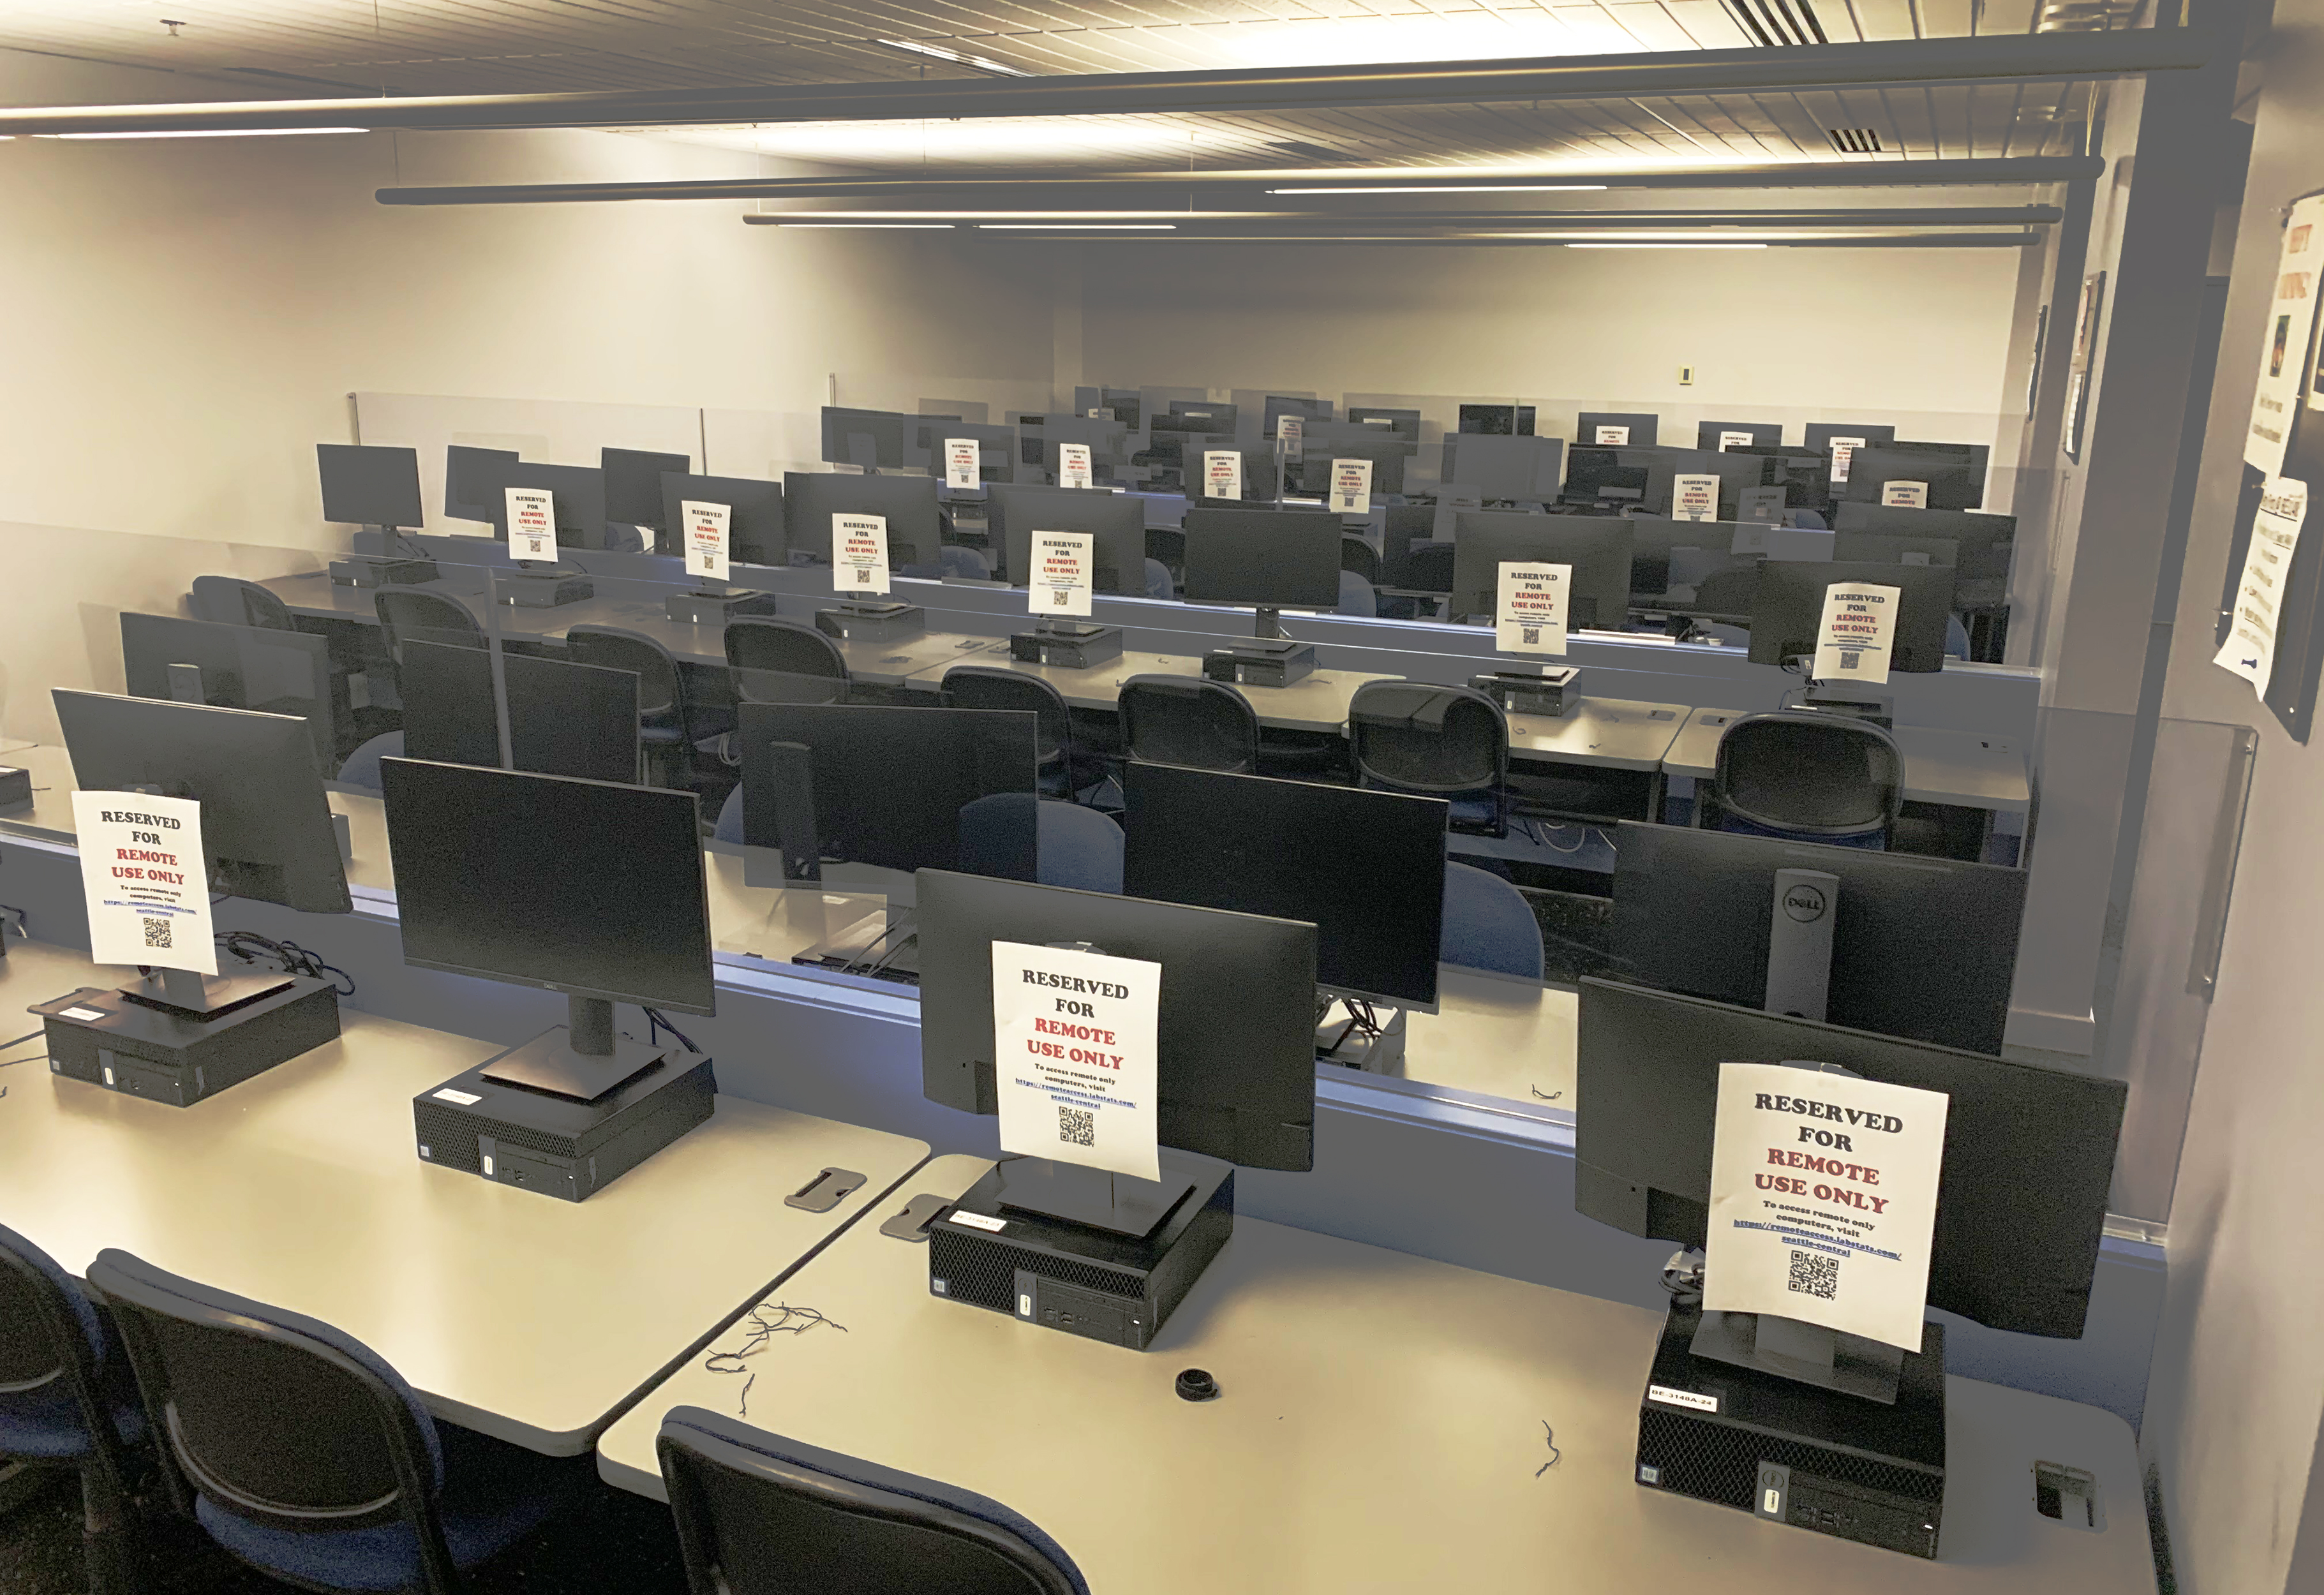 A computer lab equipped with clear separations